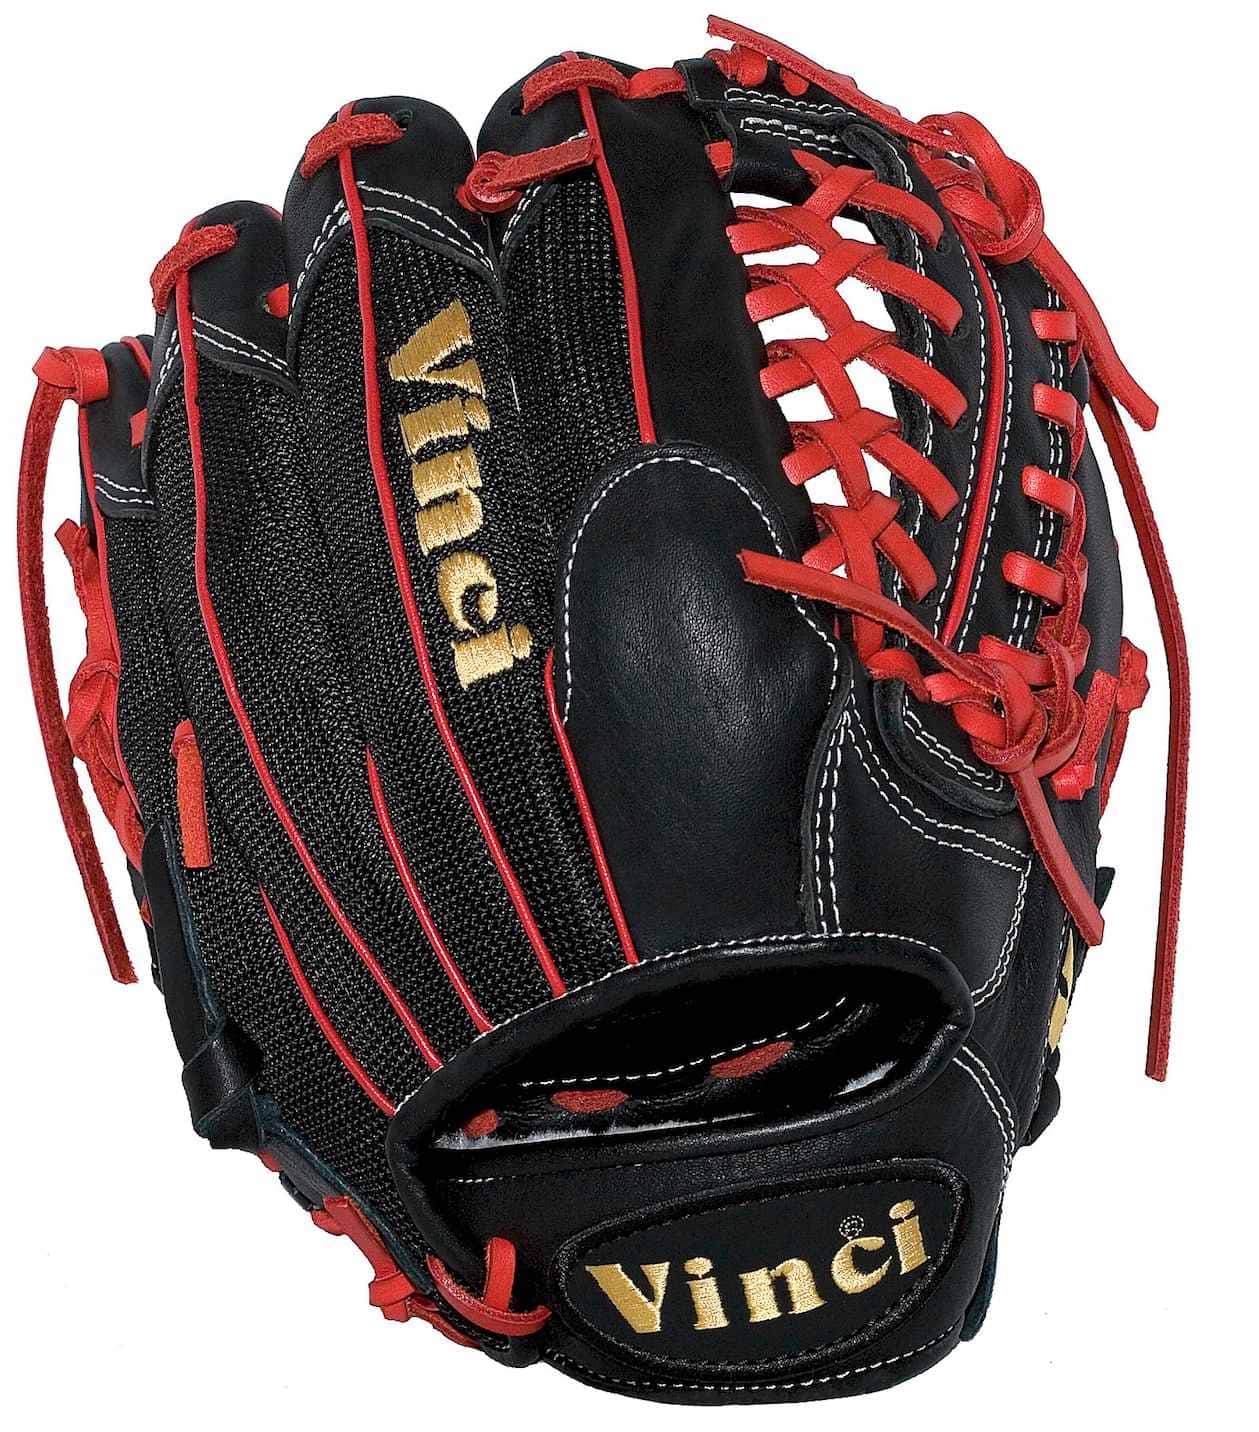 11.5 inch Baseball Glove-JC3333-22 with Black Mesh Back, Red Lace and Red  Welting